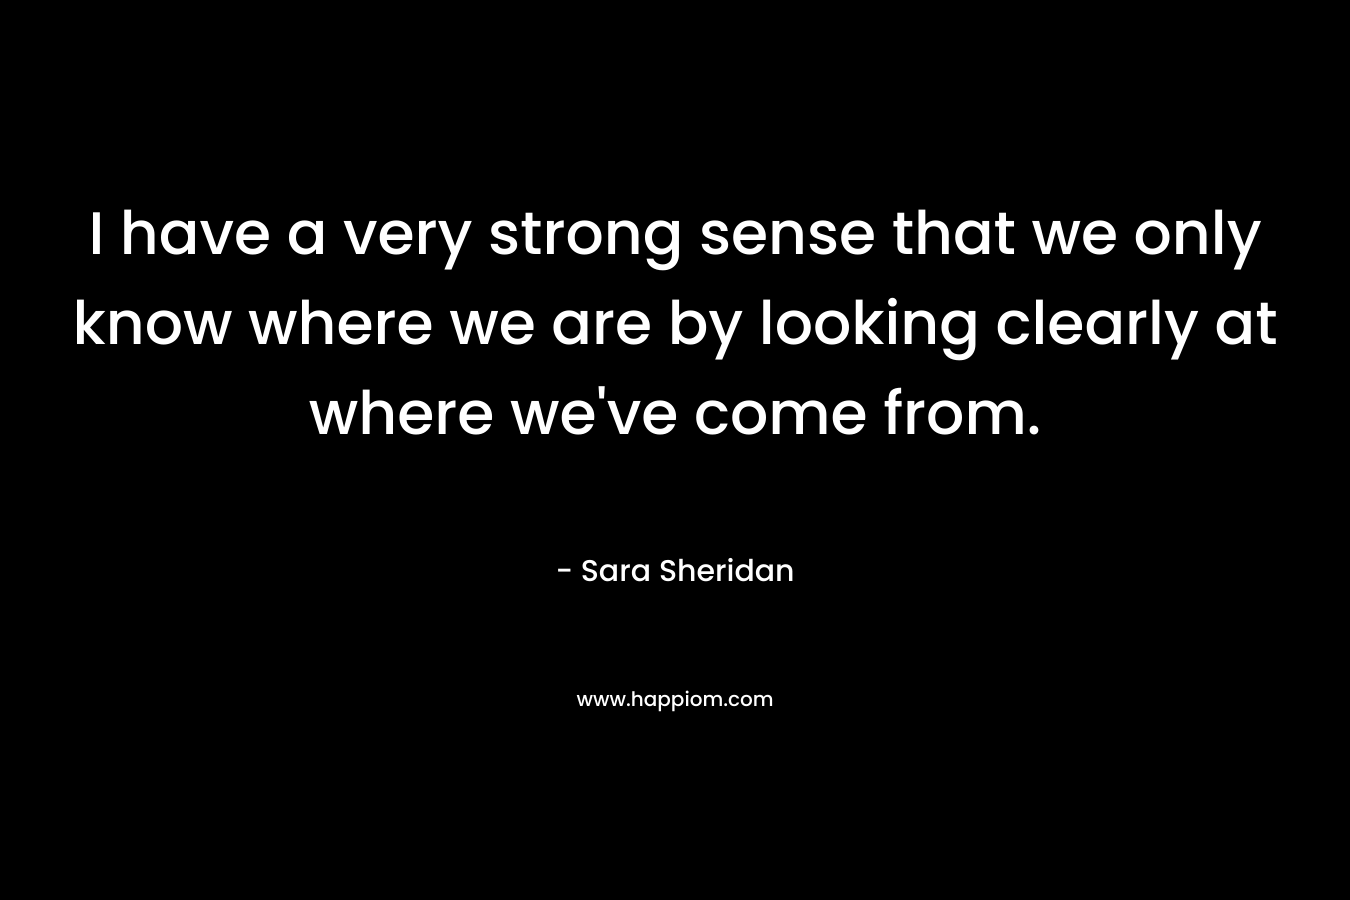 I have a very strong sense that we only know where we are by looking clearly at where we’ve come from. – Sara Sheridan